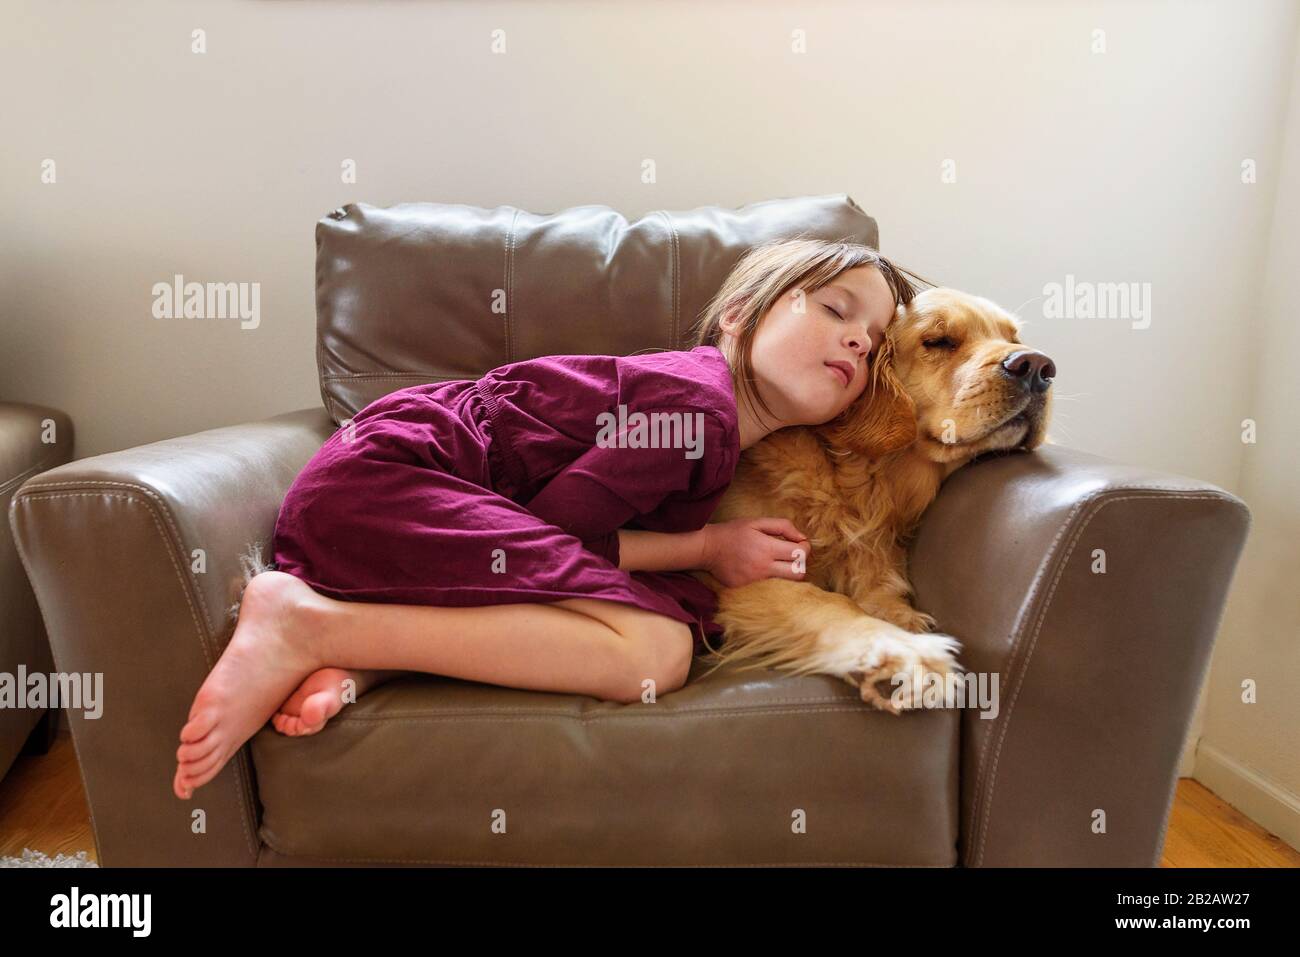 Girl curled up in an armchair with a golden retriever dog Stock Photo